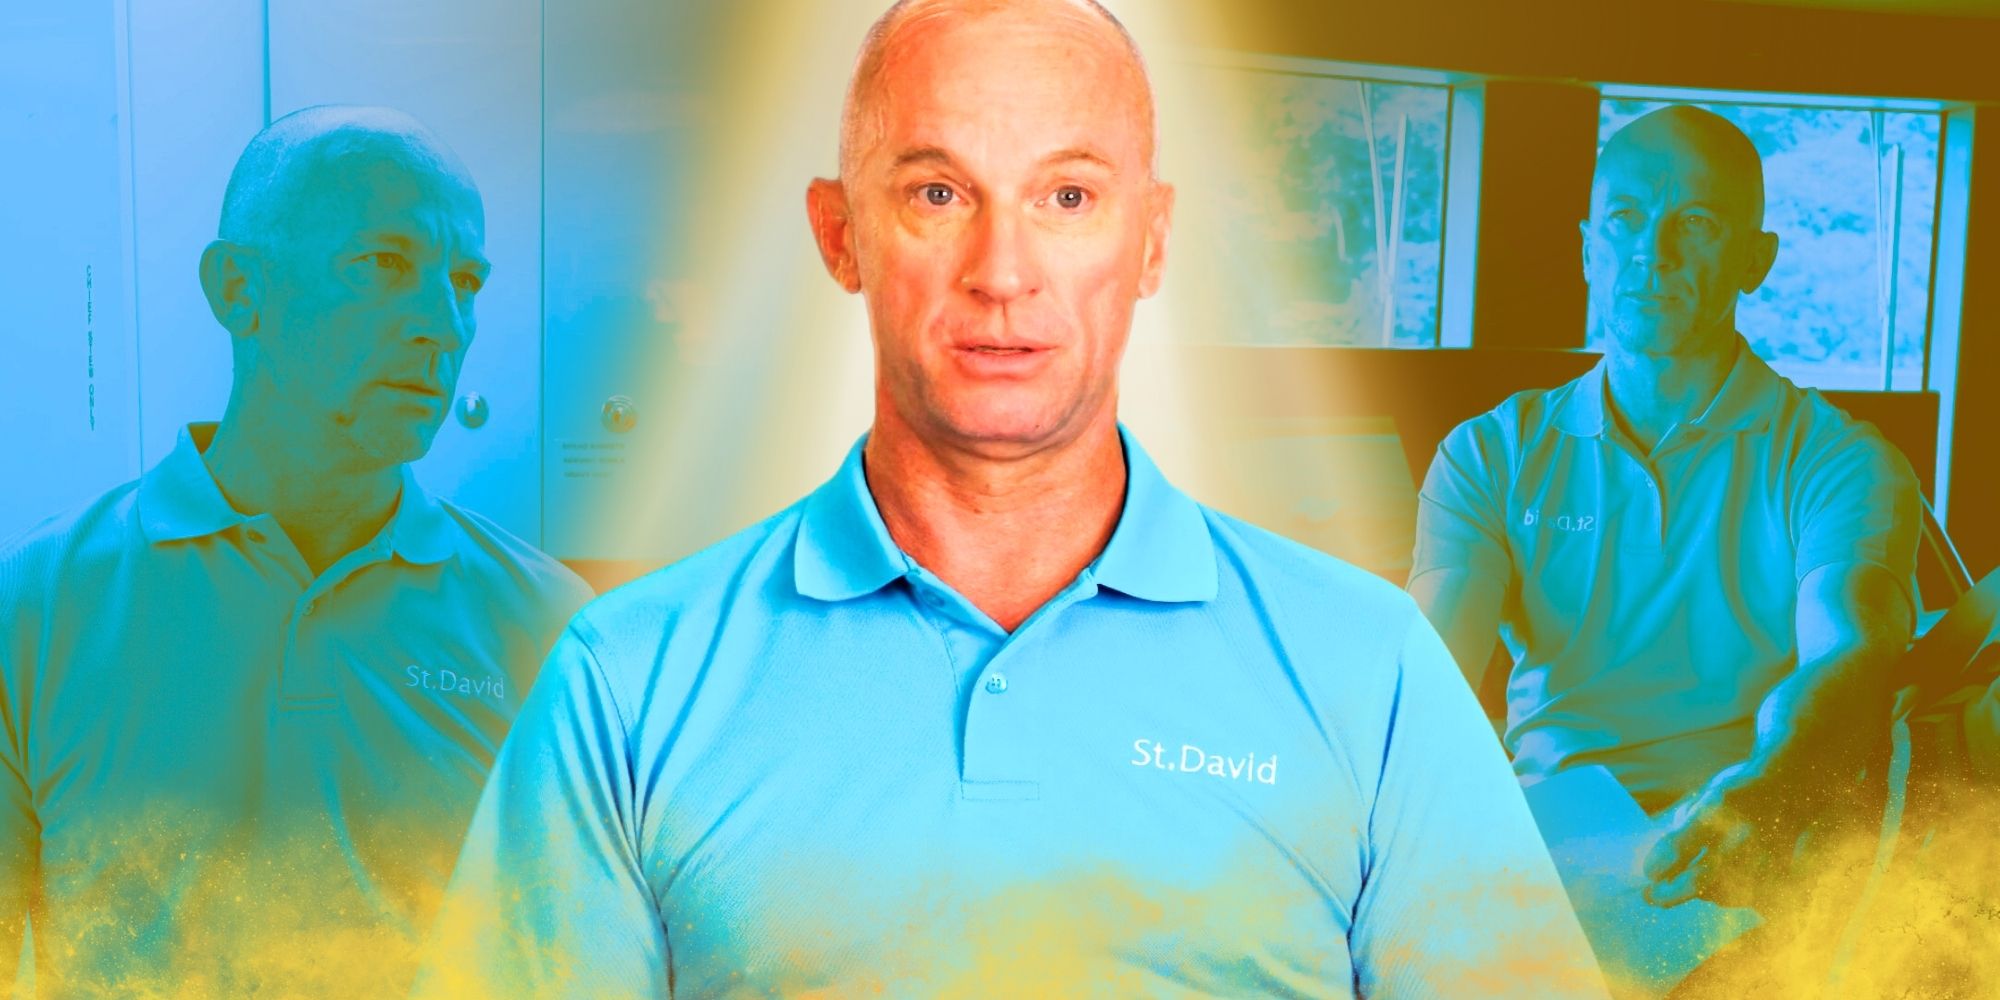 Montage of Below Deck’s Captain Kerry Titheradge in blue looking serious with blue filtered background